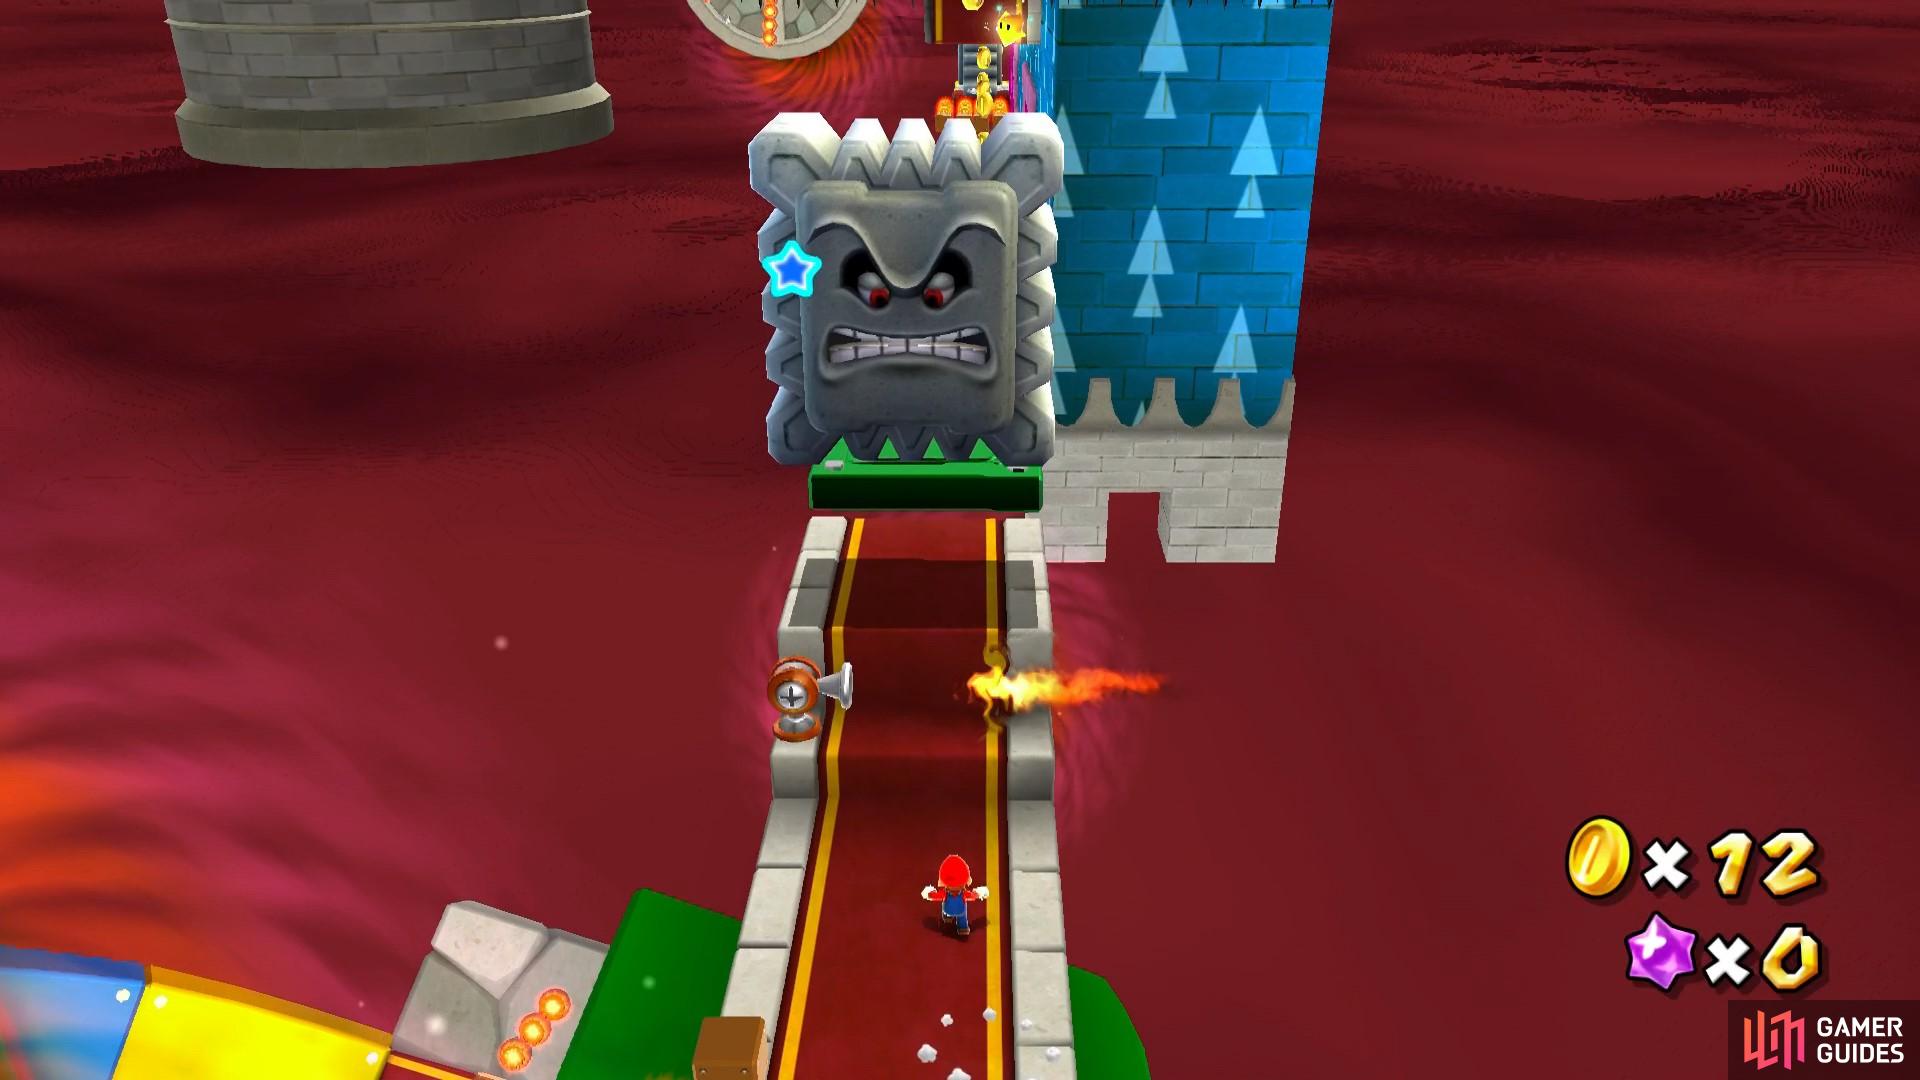 The Thwomp will instakill you so watch out!